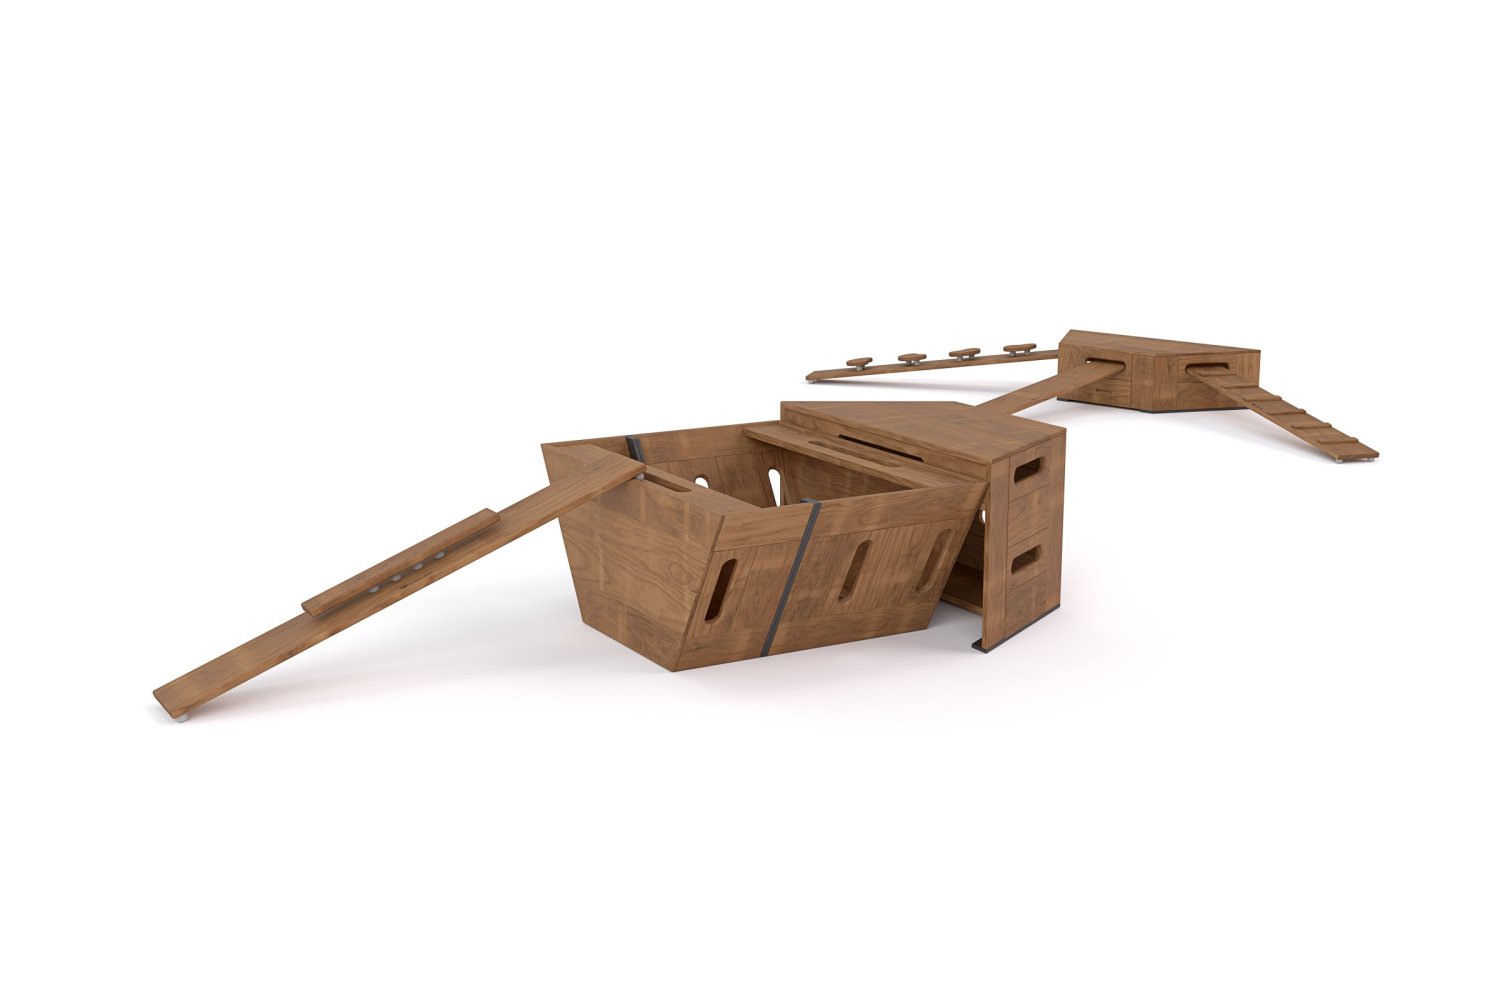 Configurable playground create a boat with climbers 